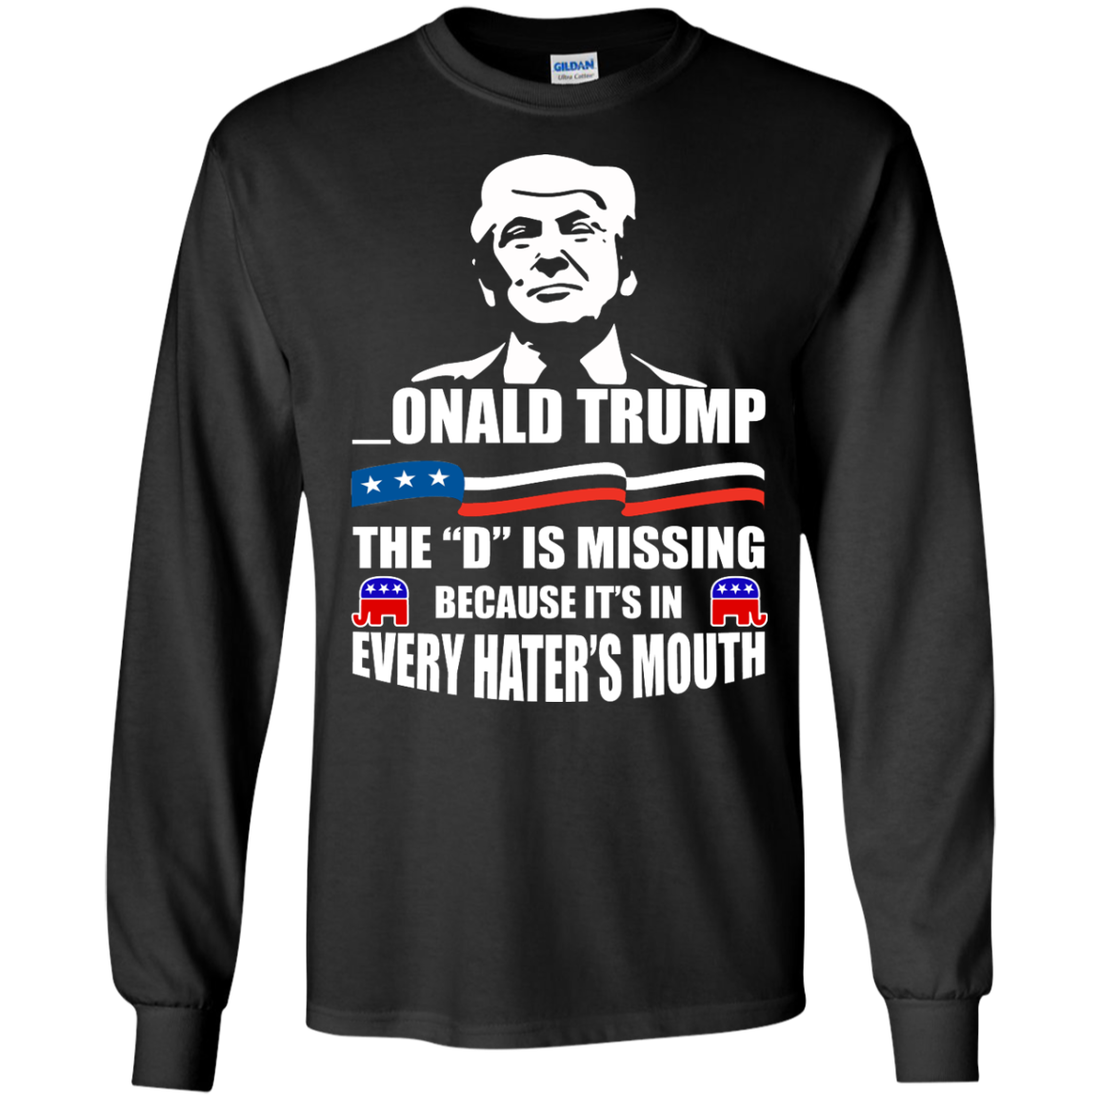 long sleeves t-shirt with design: onald trump the d is missing at ifrogtees.com